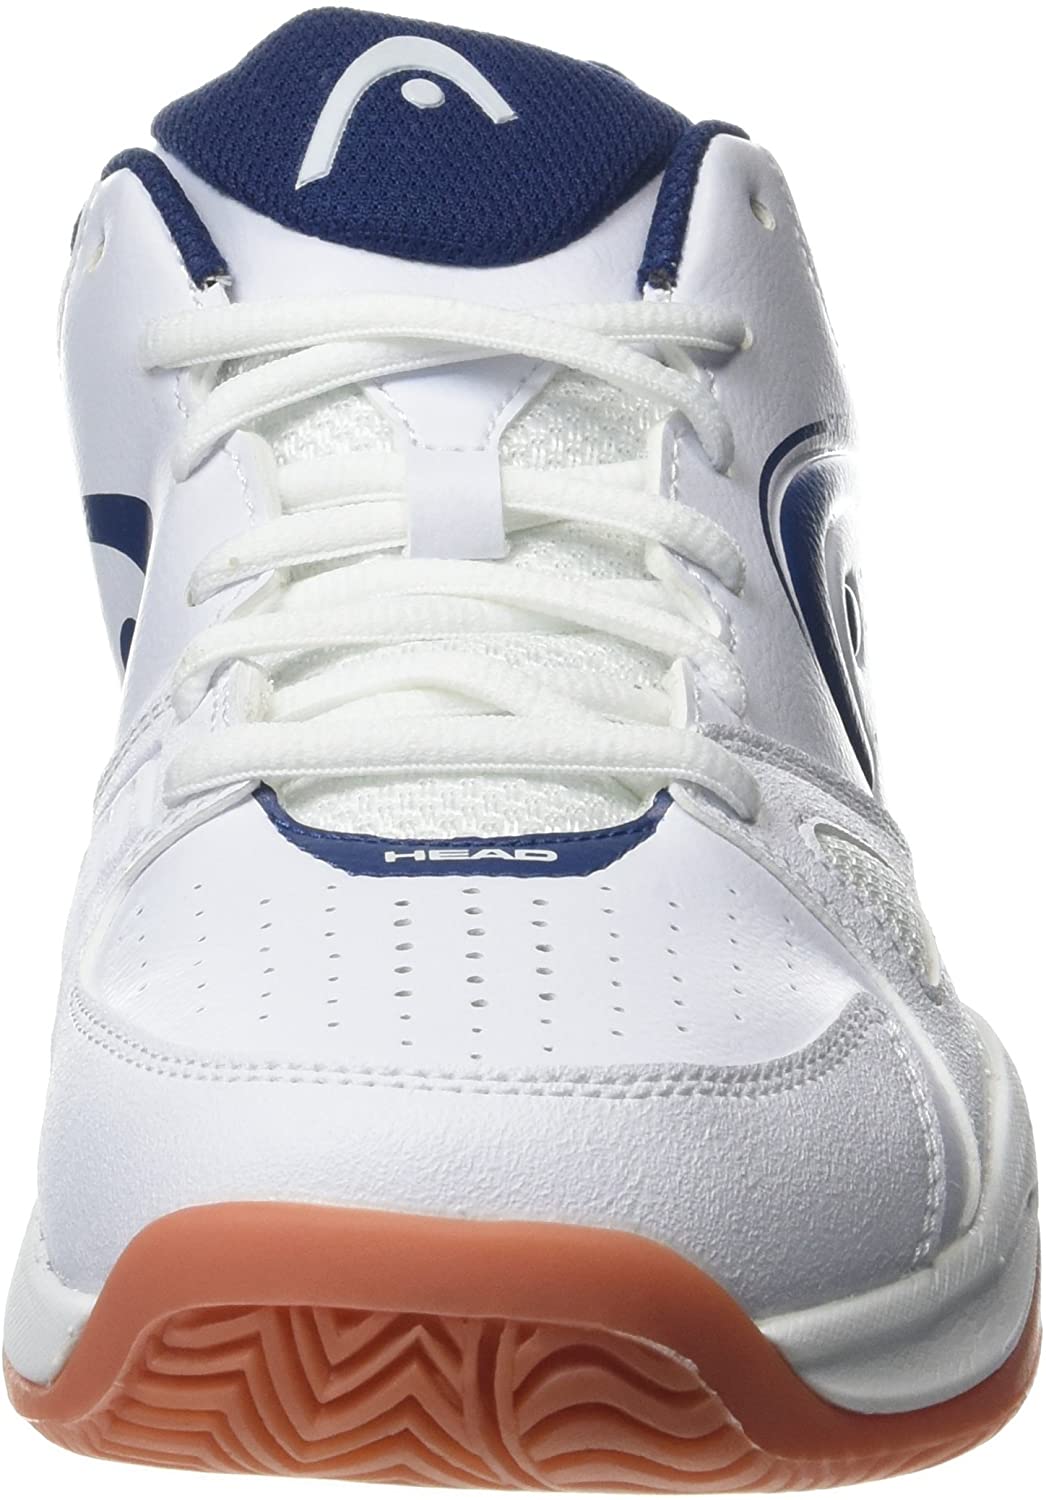 HEAD Men's Grid 2.0 Low Racquetball/Squash Indoor Court Shoes (Non-Marking) (White/Navy) 12.0 (D) US - image 2 of 7